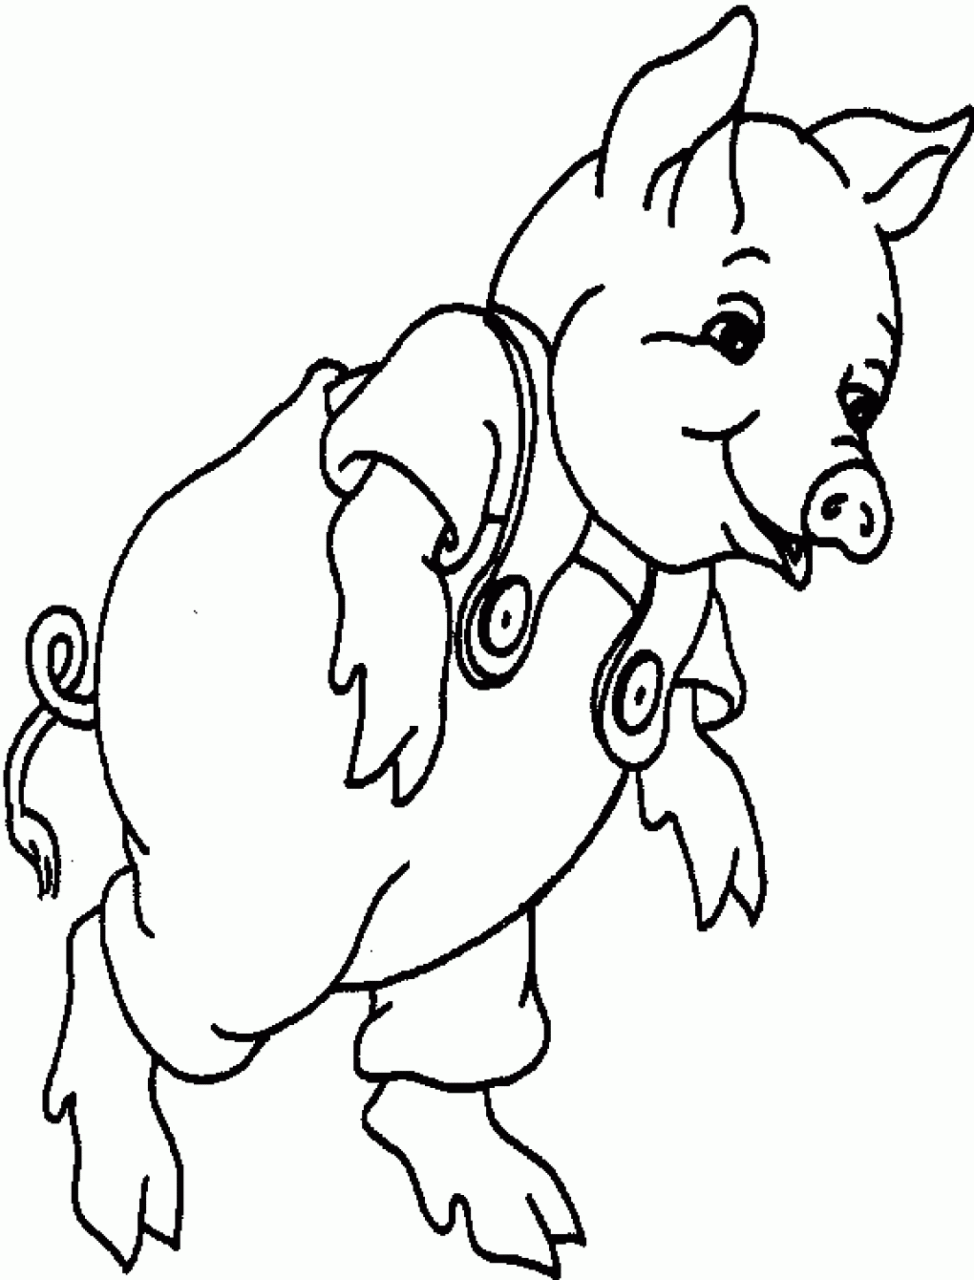 Coloring Pages For Pigs